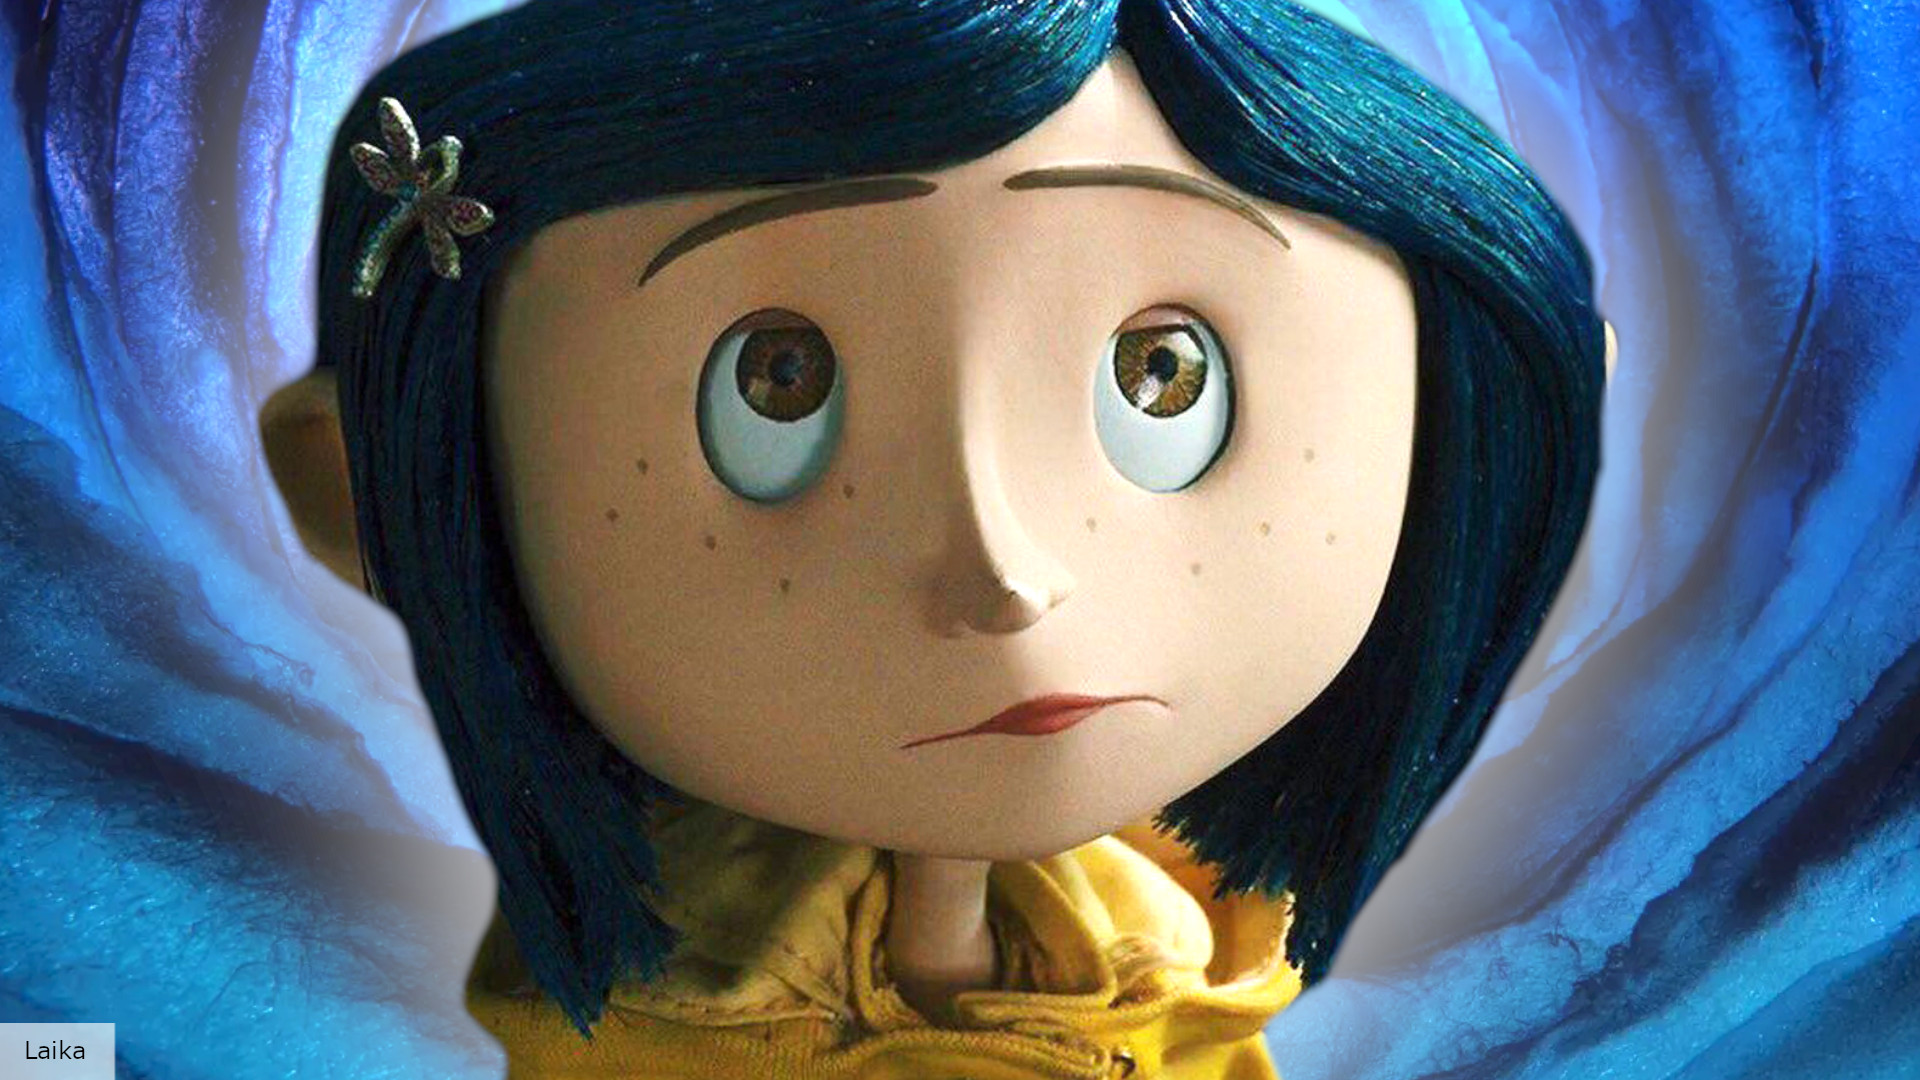 Coraline 2 release date speculation, cast, plot, and more news The